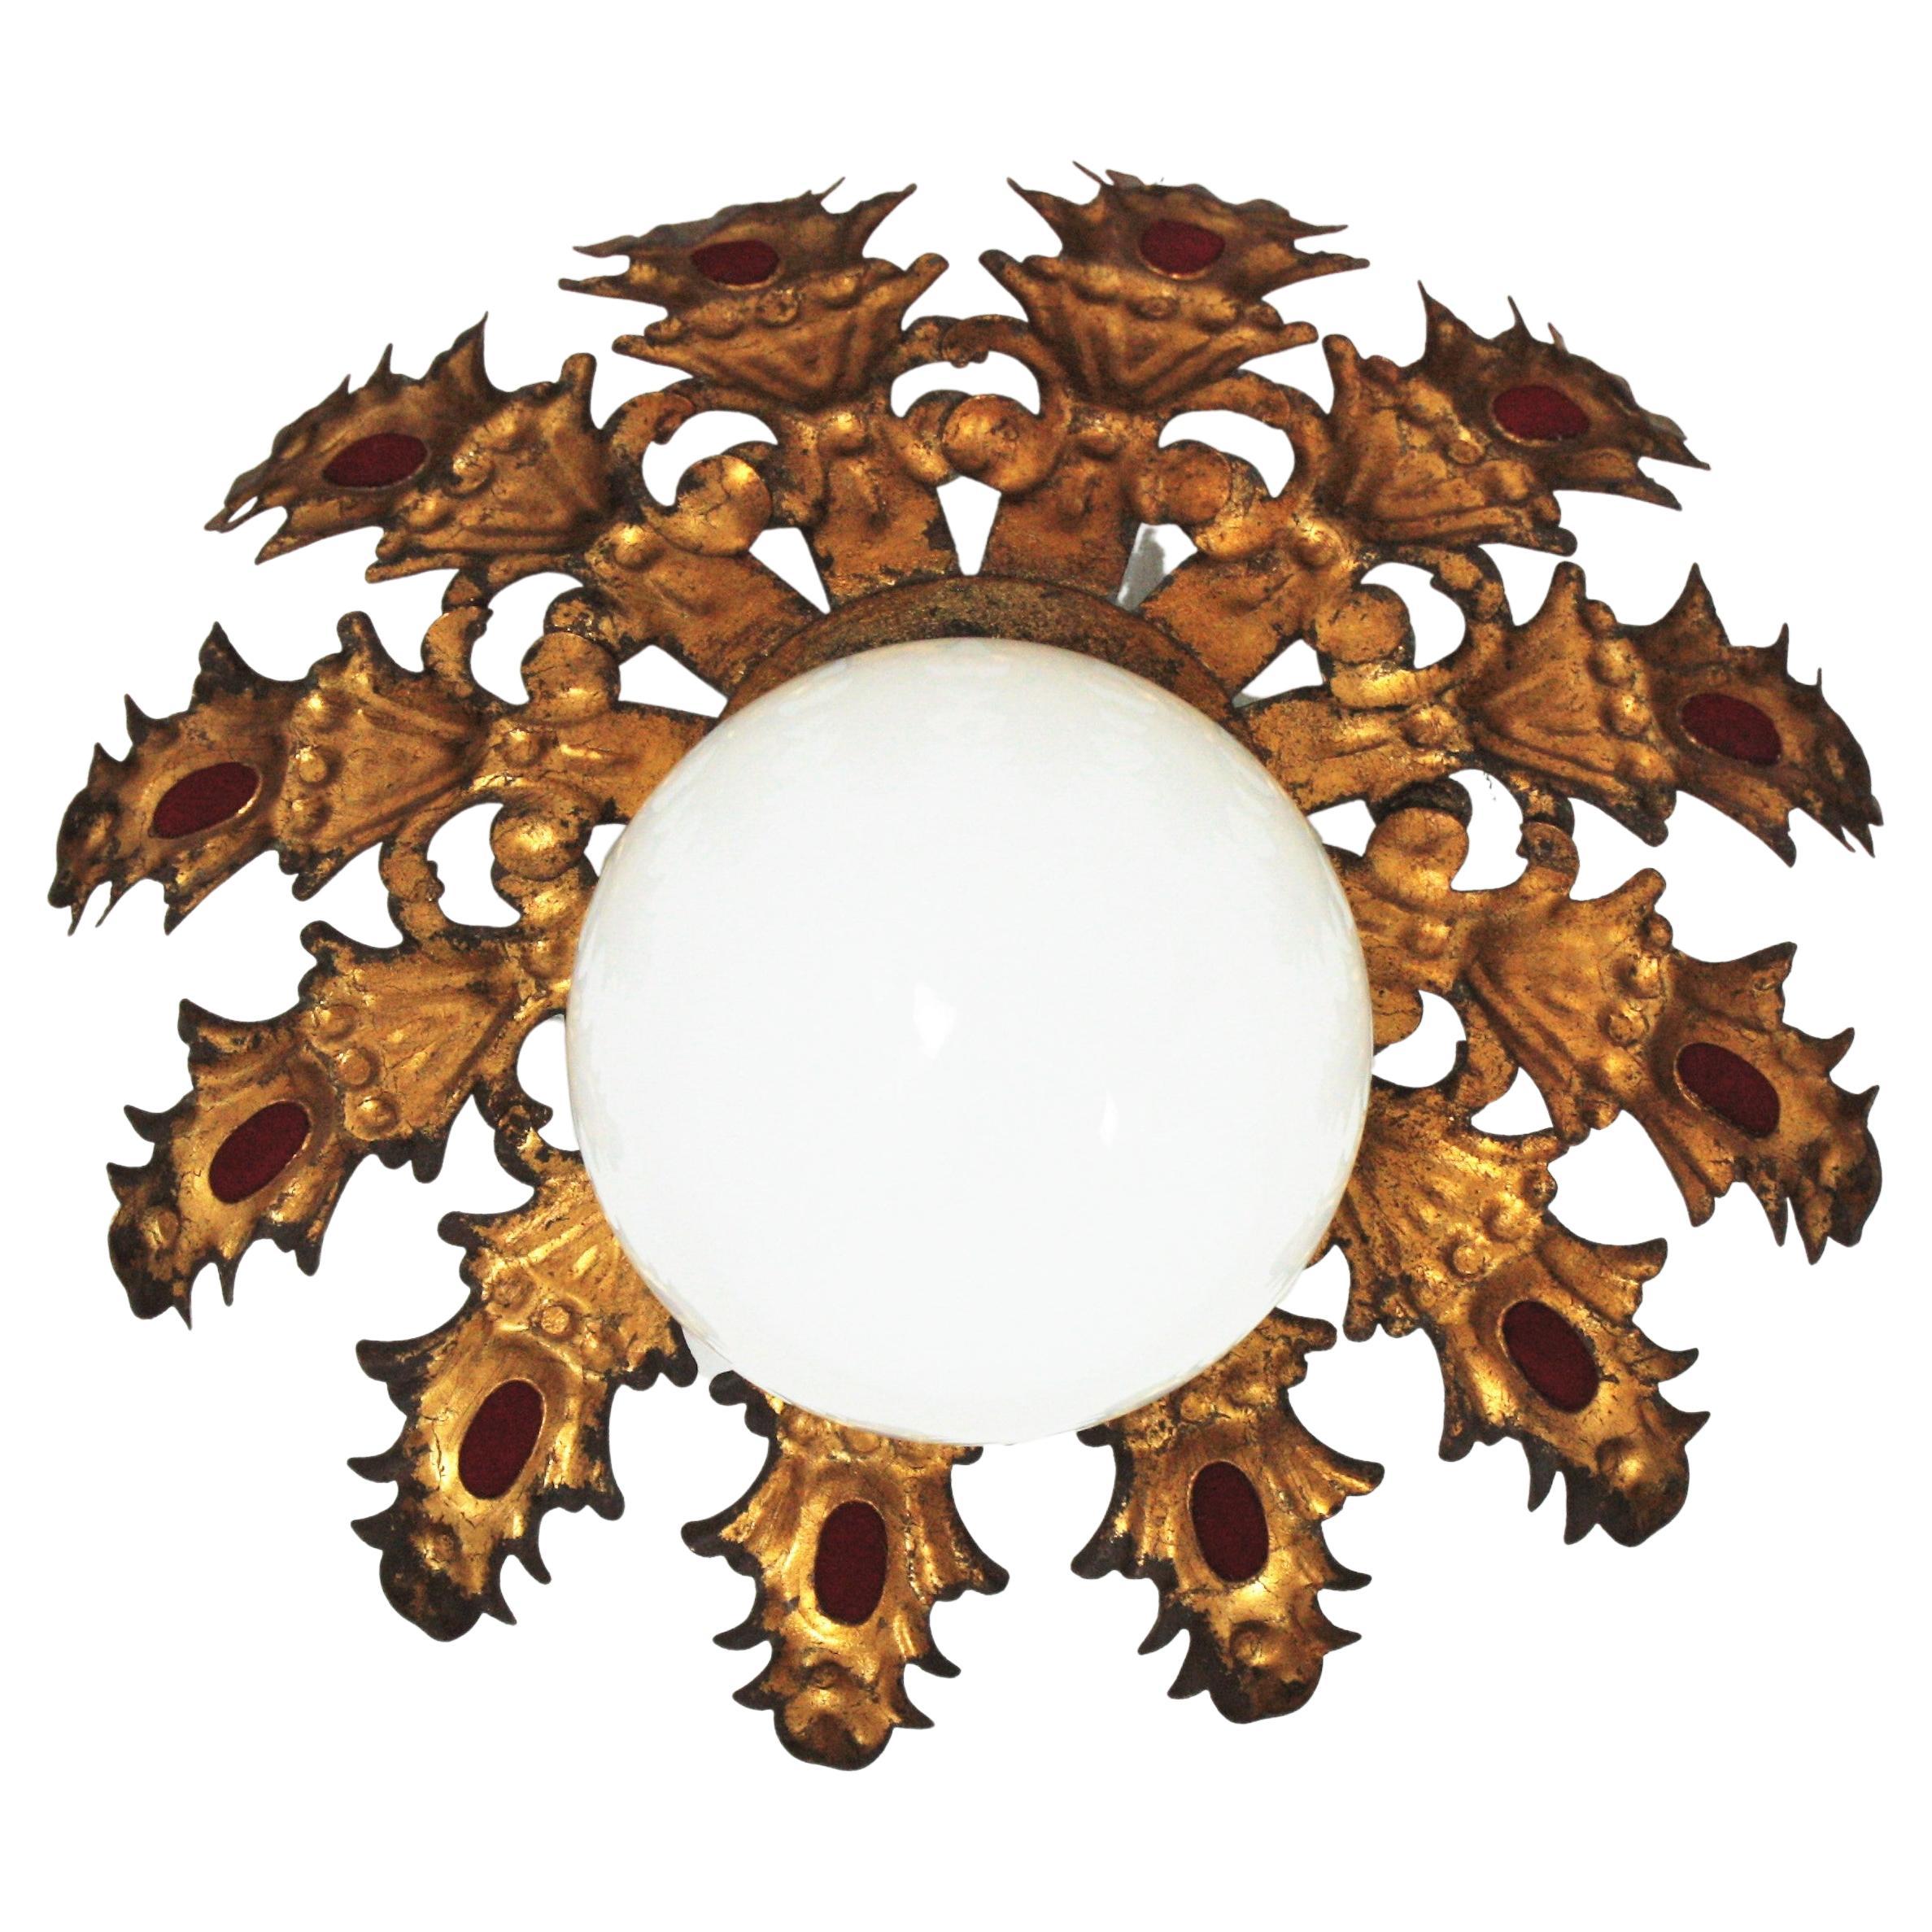 Eye catching sunburst light fixture with foliage design and milk glass globe shade, Spain, 1950s
This ceiling flush mount has a layer of leaves in gilt iron surrounding a central opaline glass globe shaped shade. It has some accents in red color on